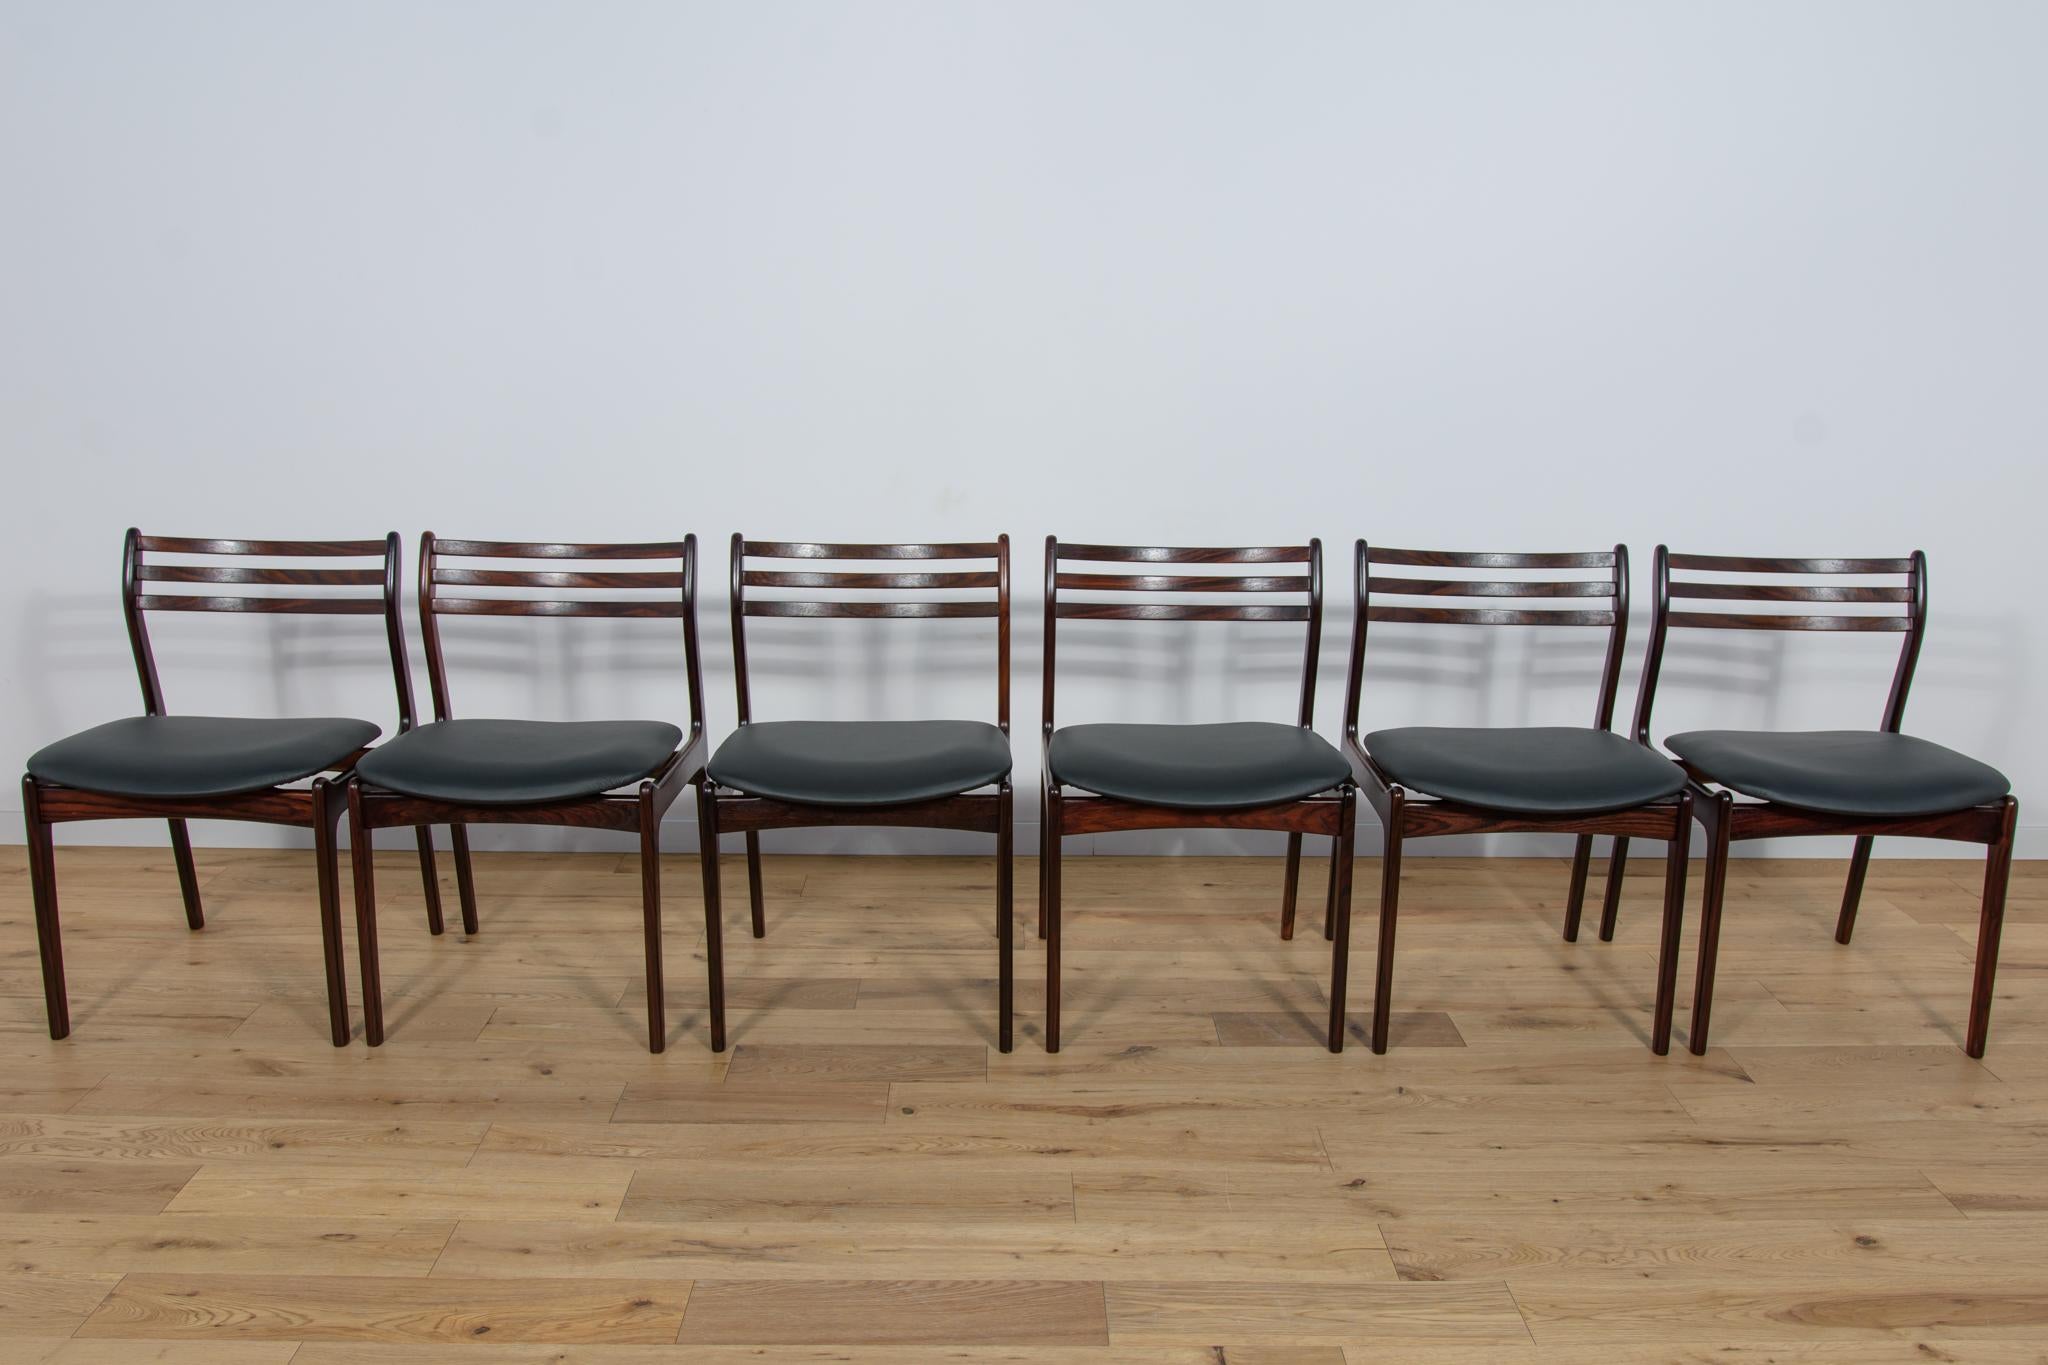 
A set of six chairs designed by Vestervig Eriksen for the Danish manufacture Brdr. Tromborg in the 1960s. Chairs with a beautiful, unique form, testifying to the high craftsmanship of design and workmanship, characteristic of Danish design from the